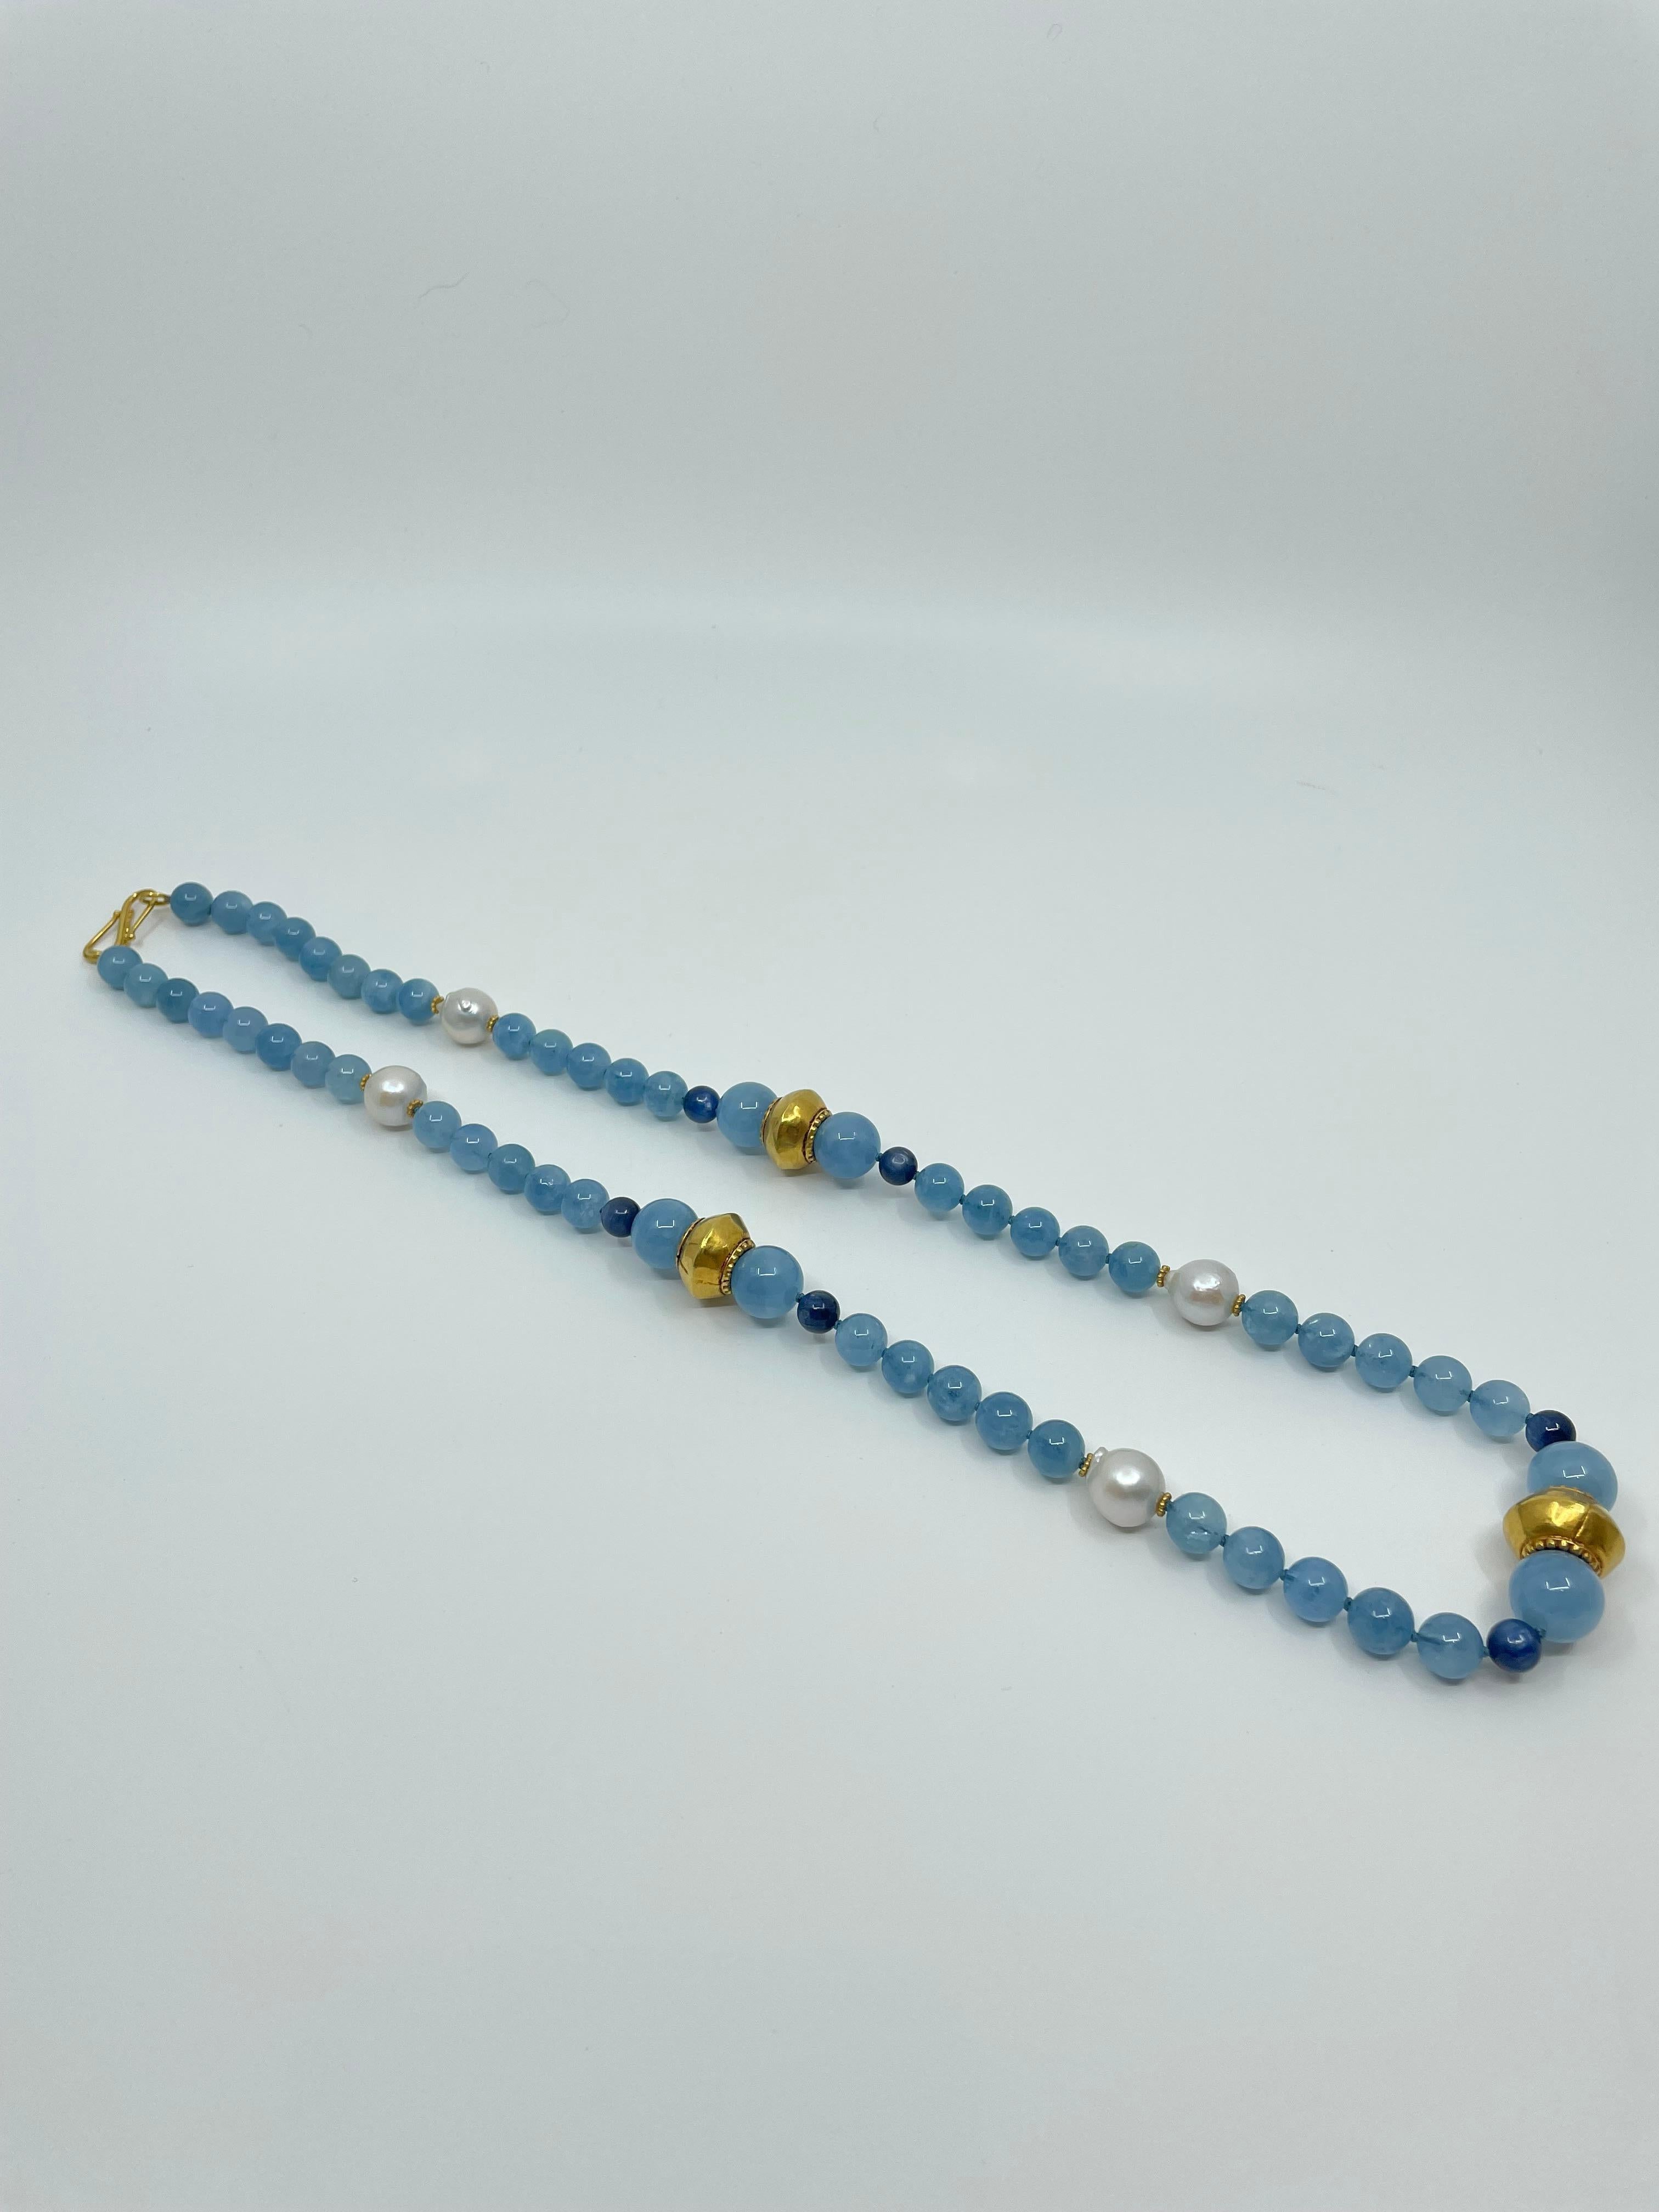 Necklace with Aquamarine, Kyanite, South Sea Pearls, Gold & 18K Gold For Sale 4